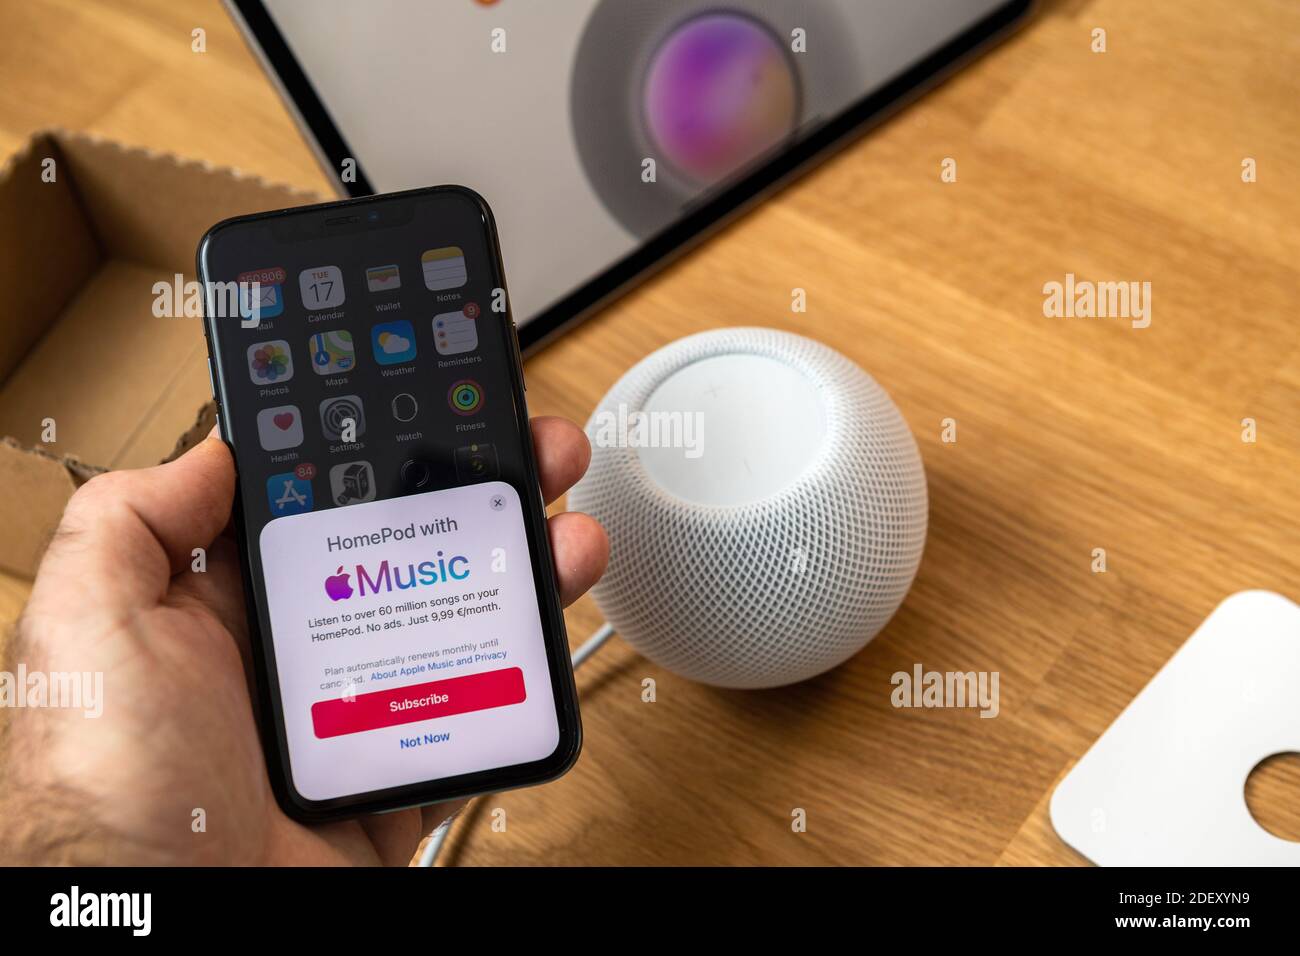 Frankfurt Germany Nov 17 2020 Man Hand Holding Iphone Next To Latest Apple Computers Homepod Mini New Small Smart Speaker Featuring Powerful Sound And Siri Personal Assistant Stock Photo Alamy